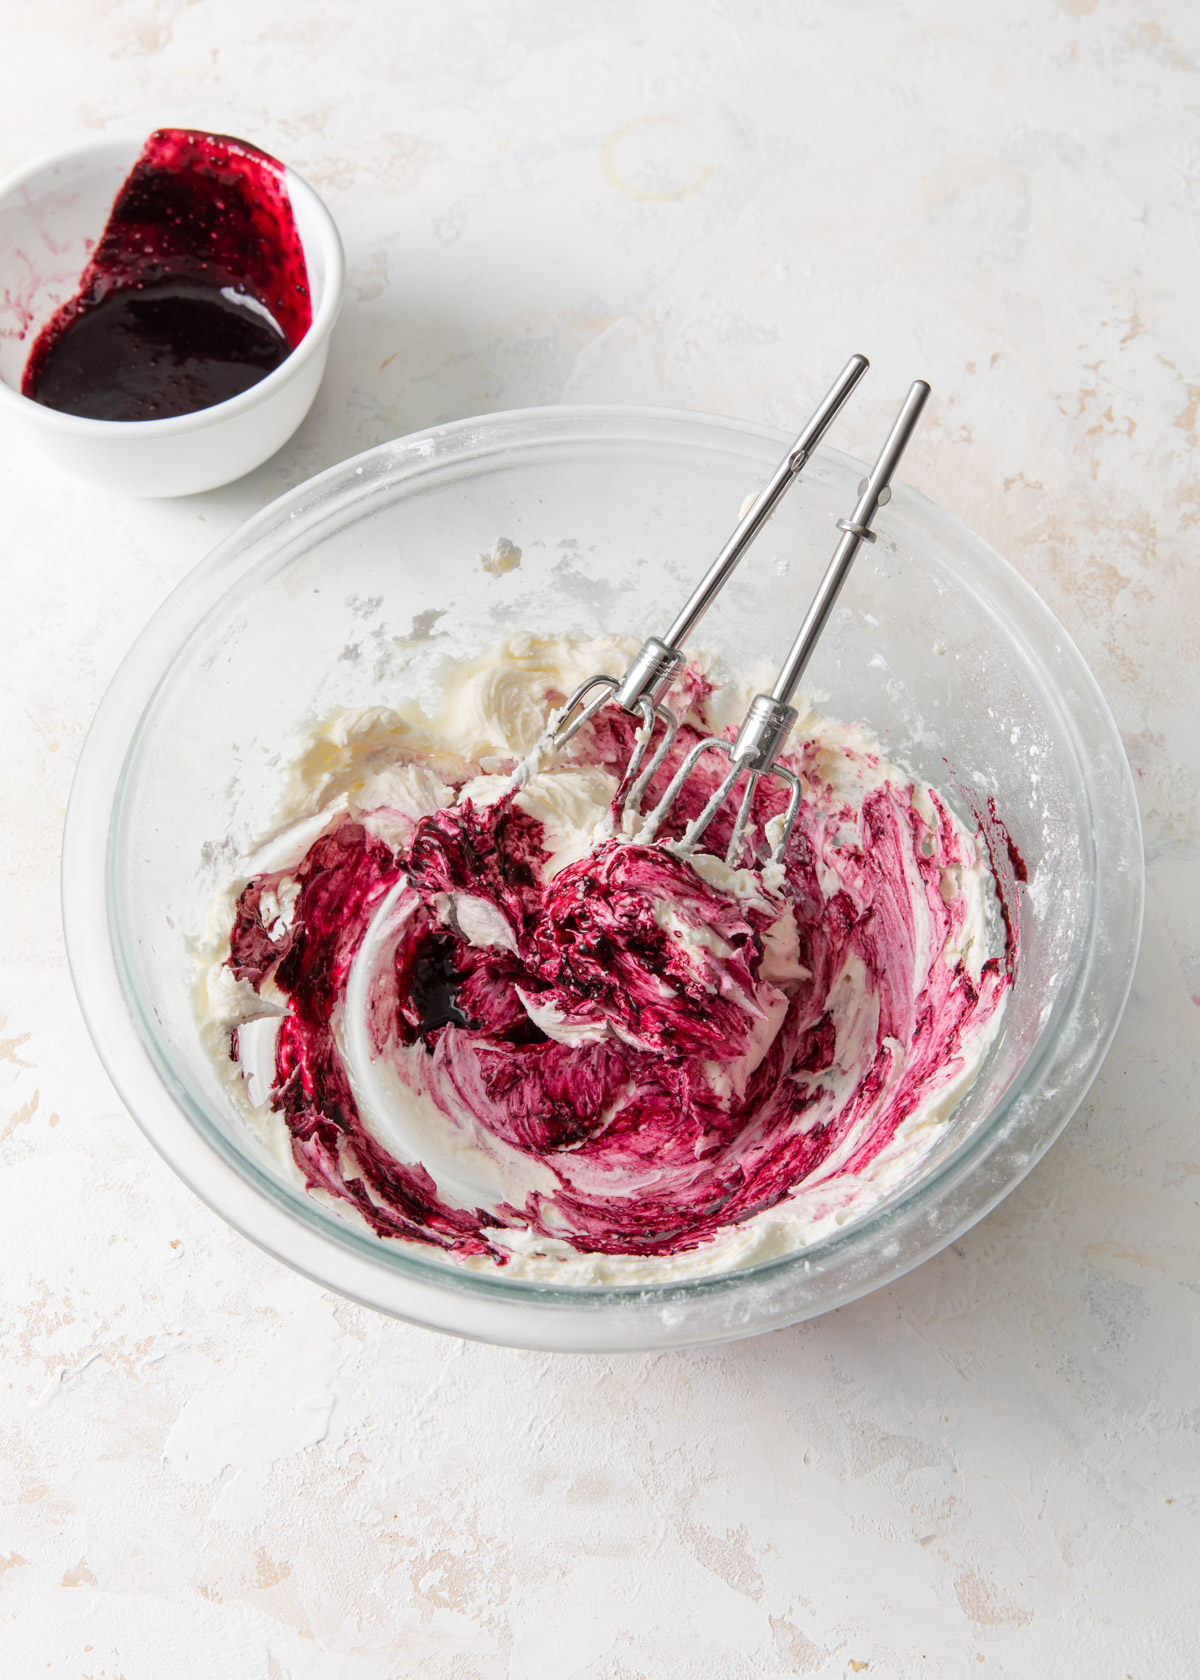 Mixing in the blueberry sauce to whipped buttercream frosting